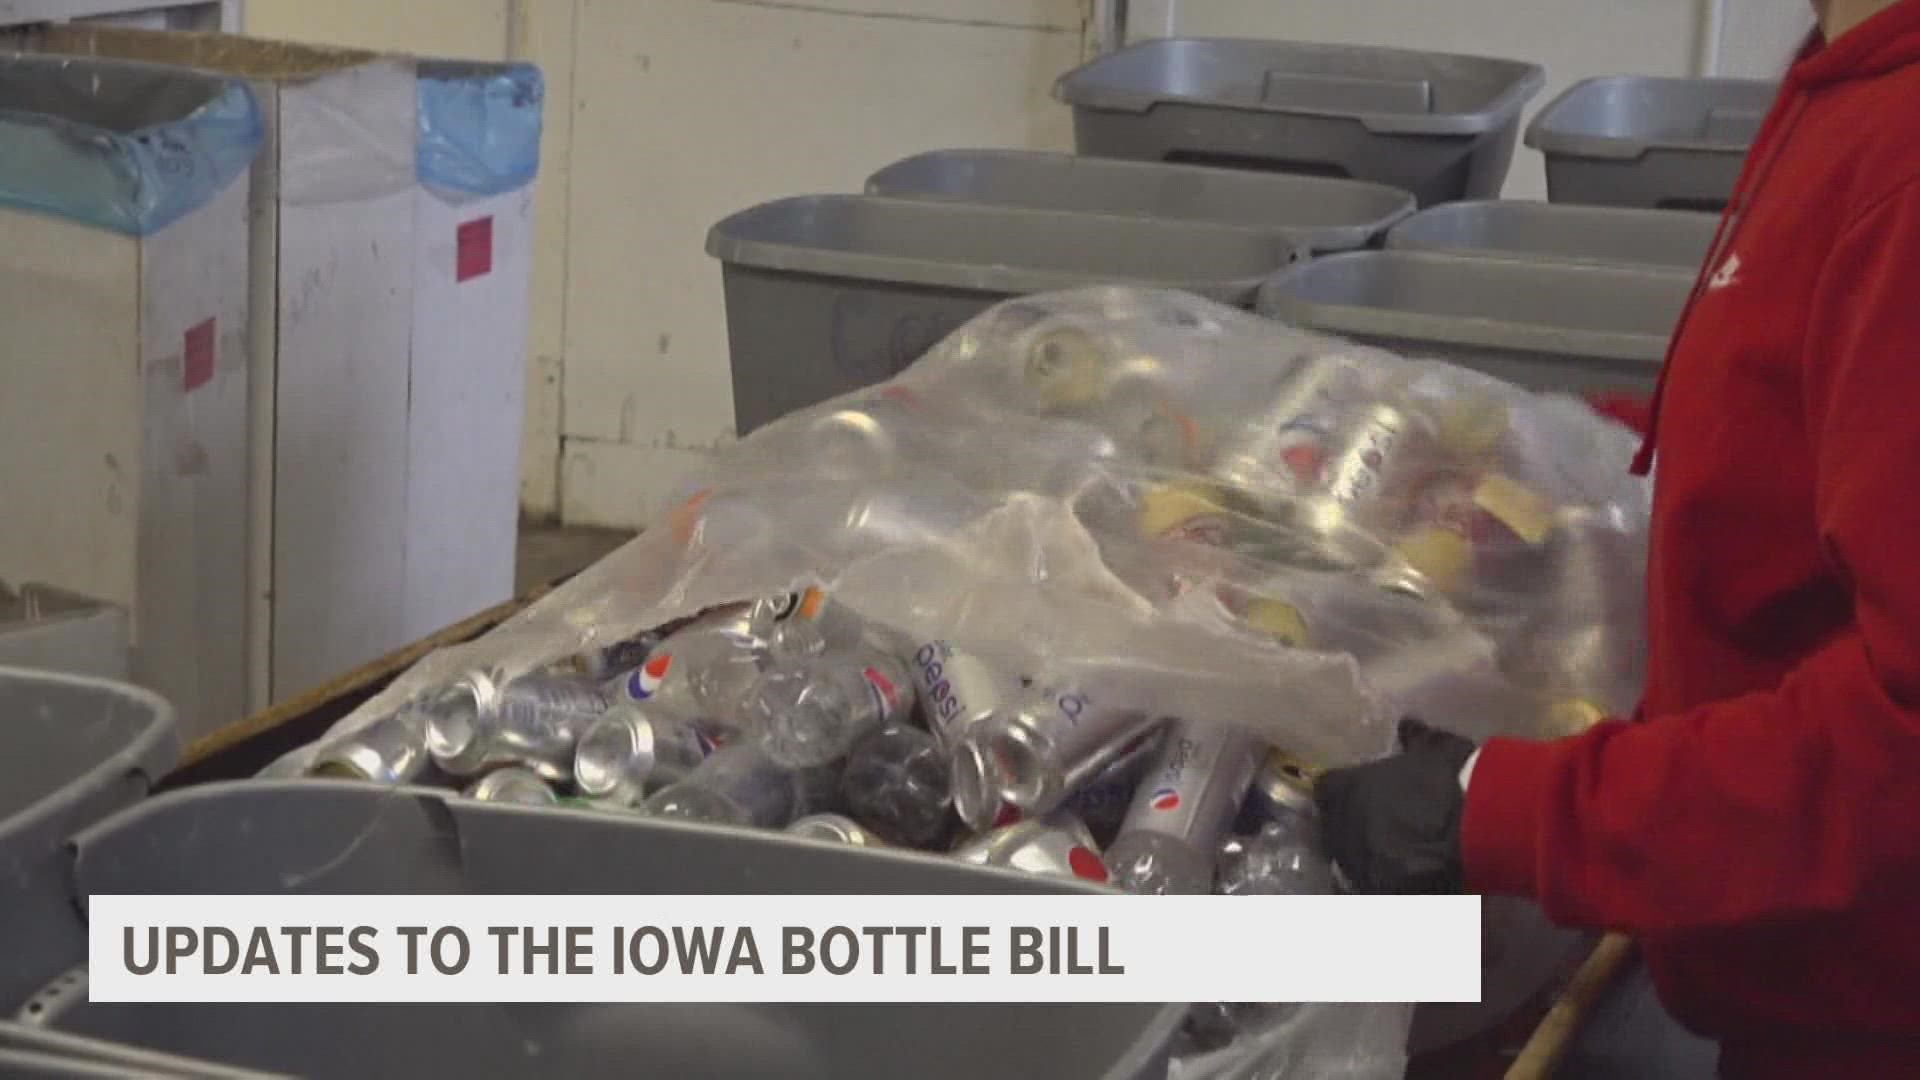 Iowa's changes to the bottle bill aren't progressive and lag behind those of other states, according to recycling officials.